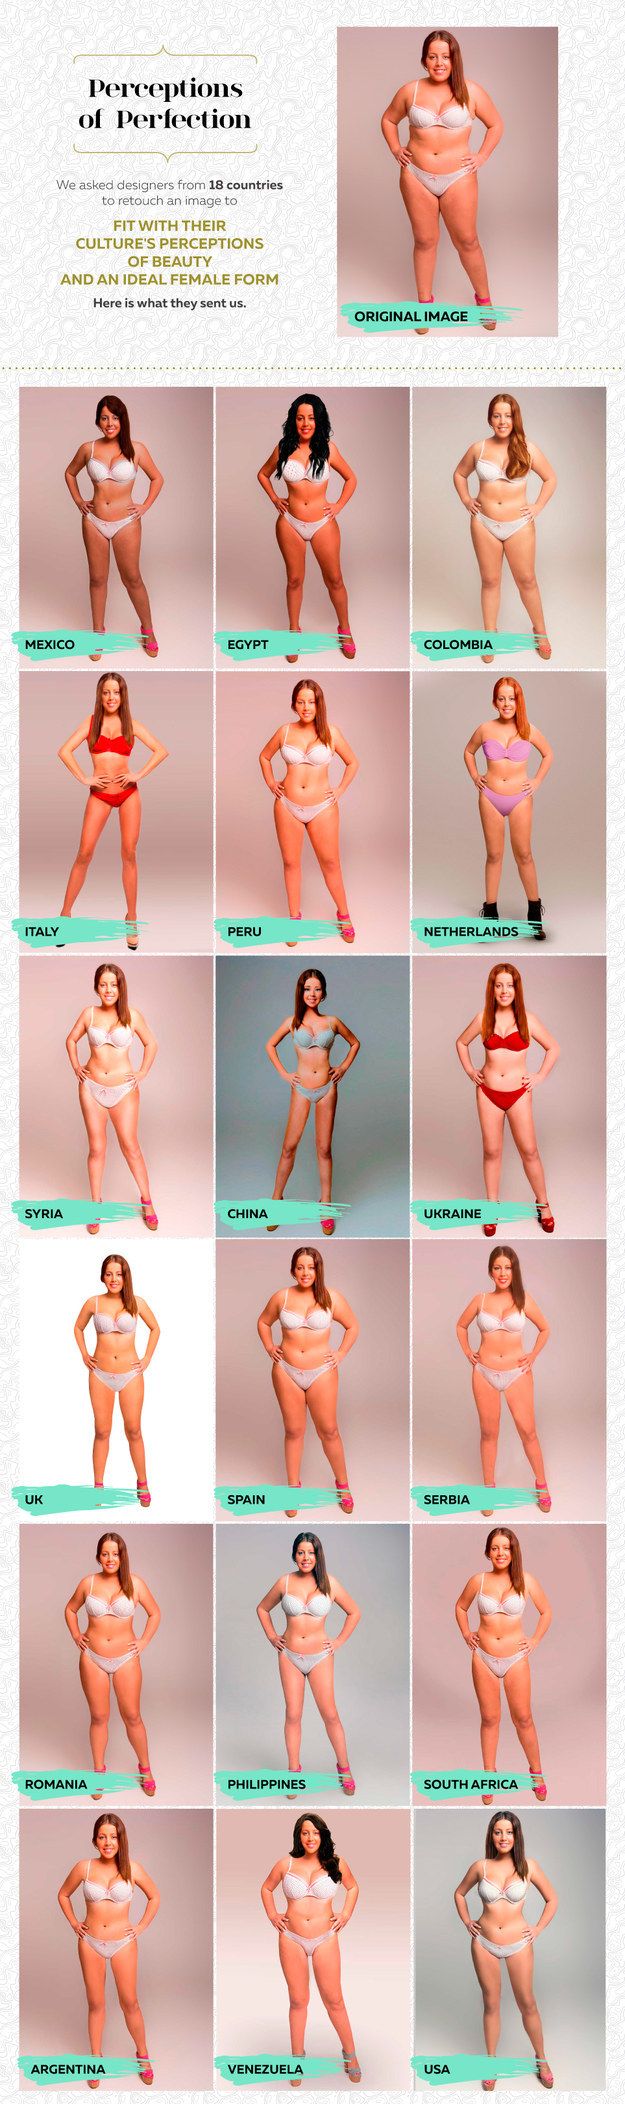 Woman gets her body photoshopped in 18 different countries infographic